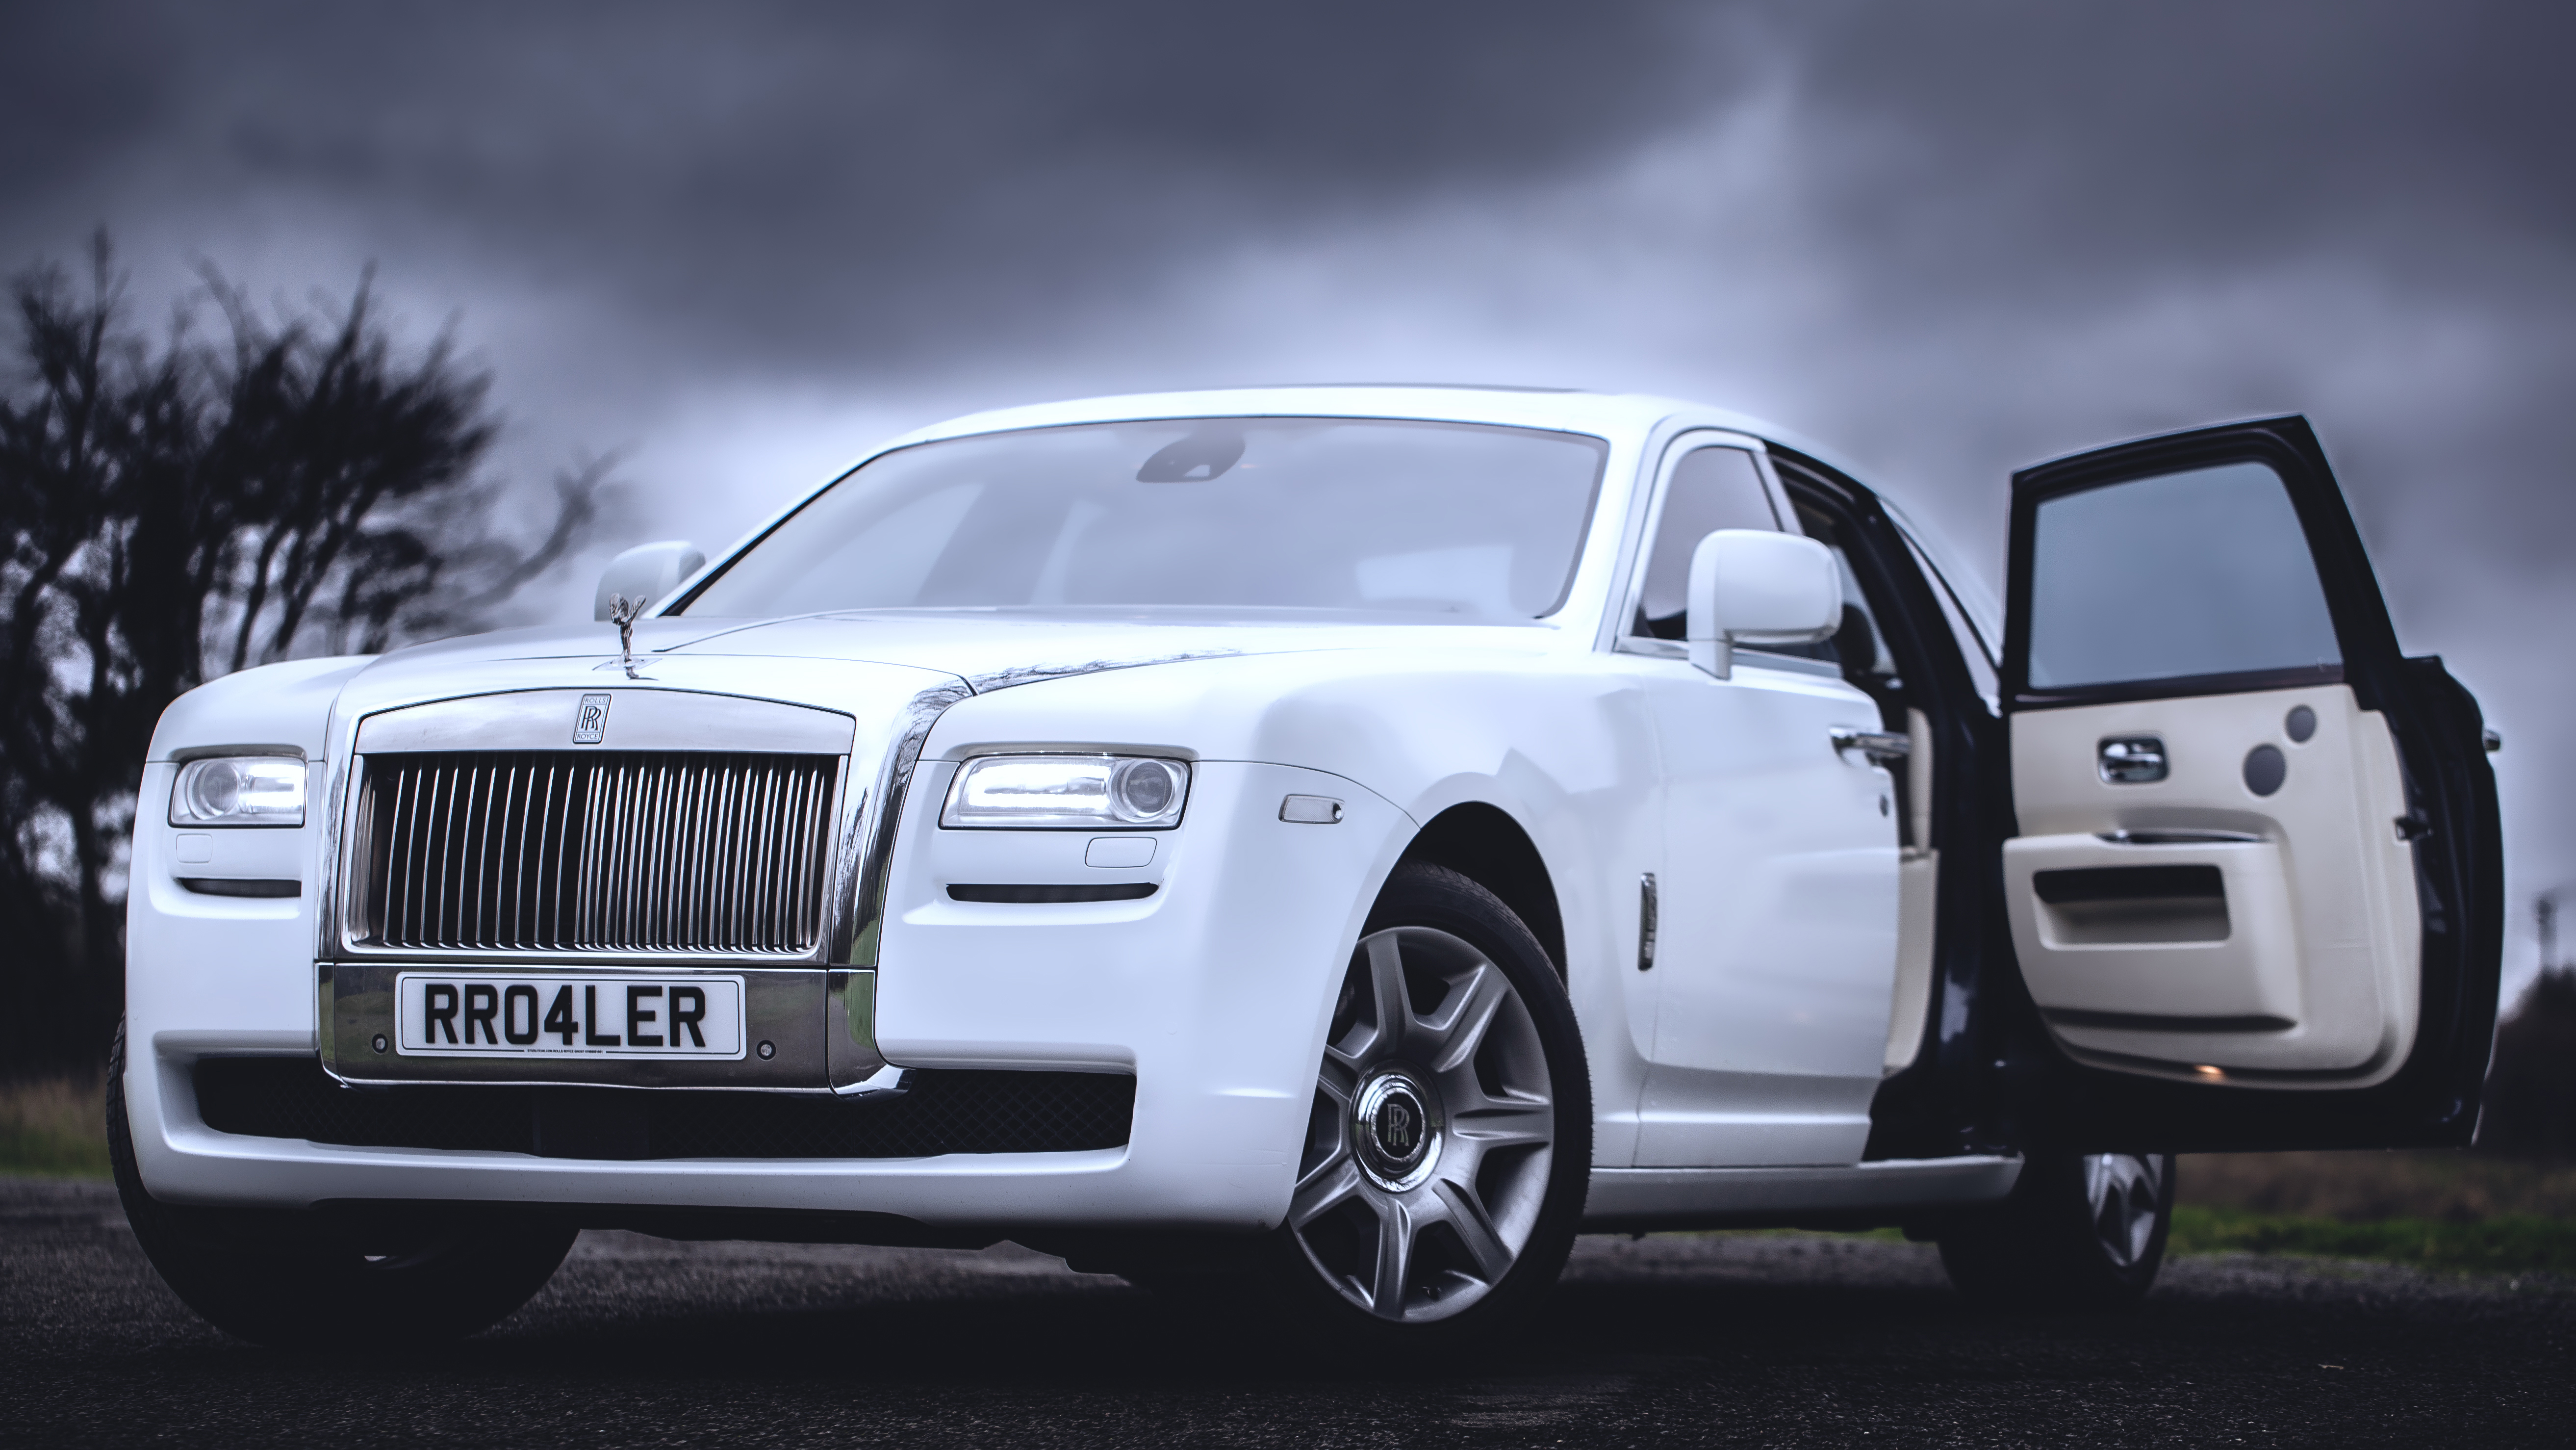 30 Used RollsRoyce Ghost Cars for sale at Motorscouk